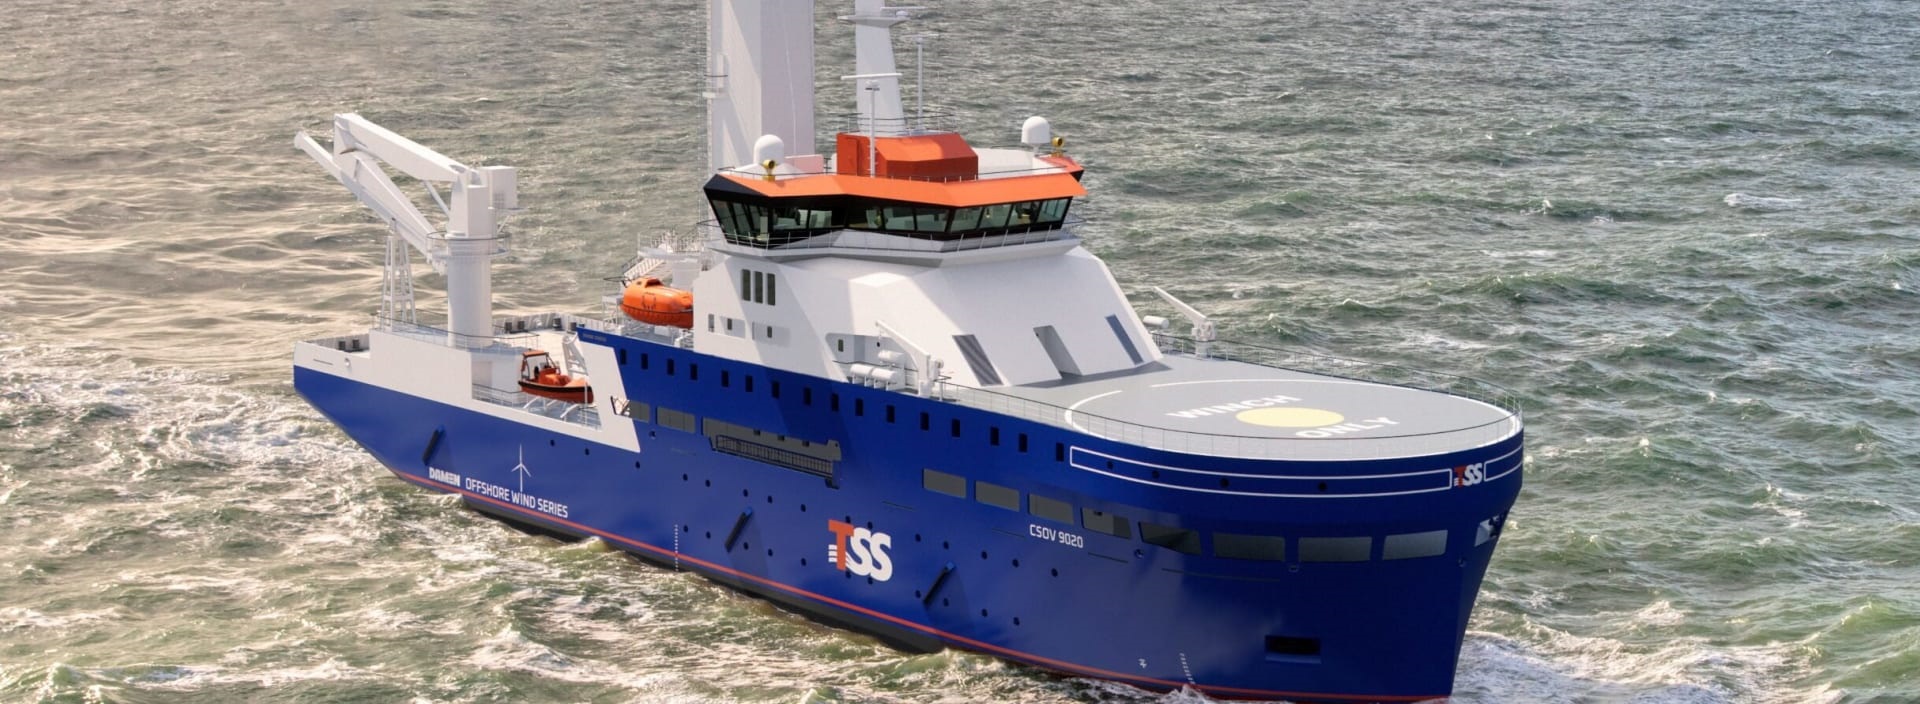 Damen Shipyards signs contract with Ta San Shang Marine Co. Ltd to supply a new CSOV